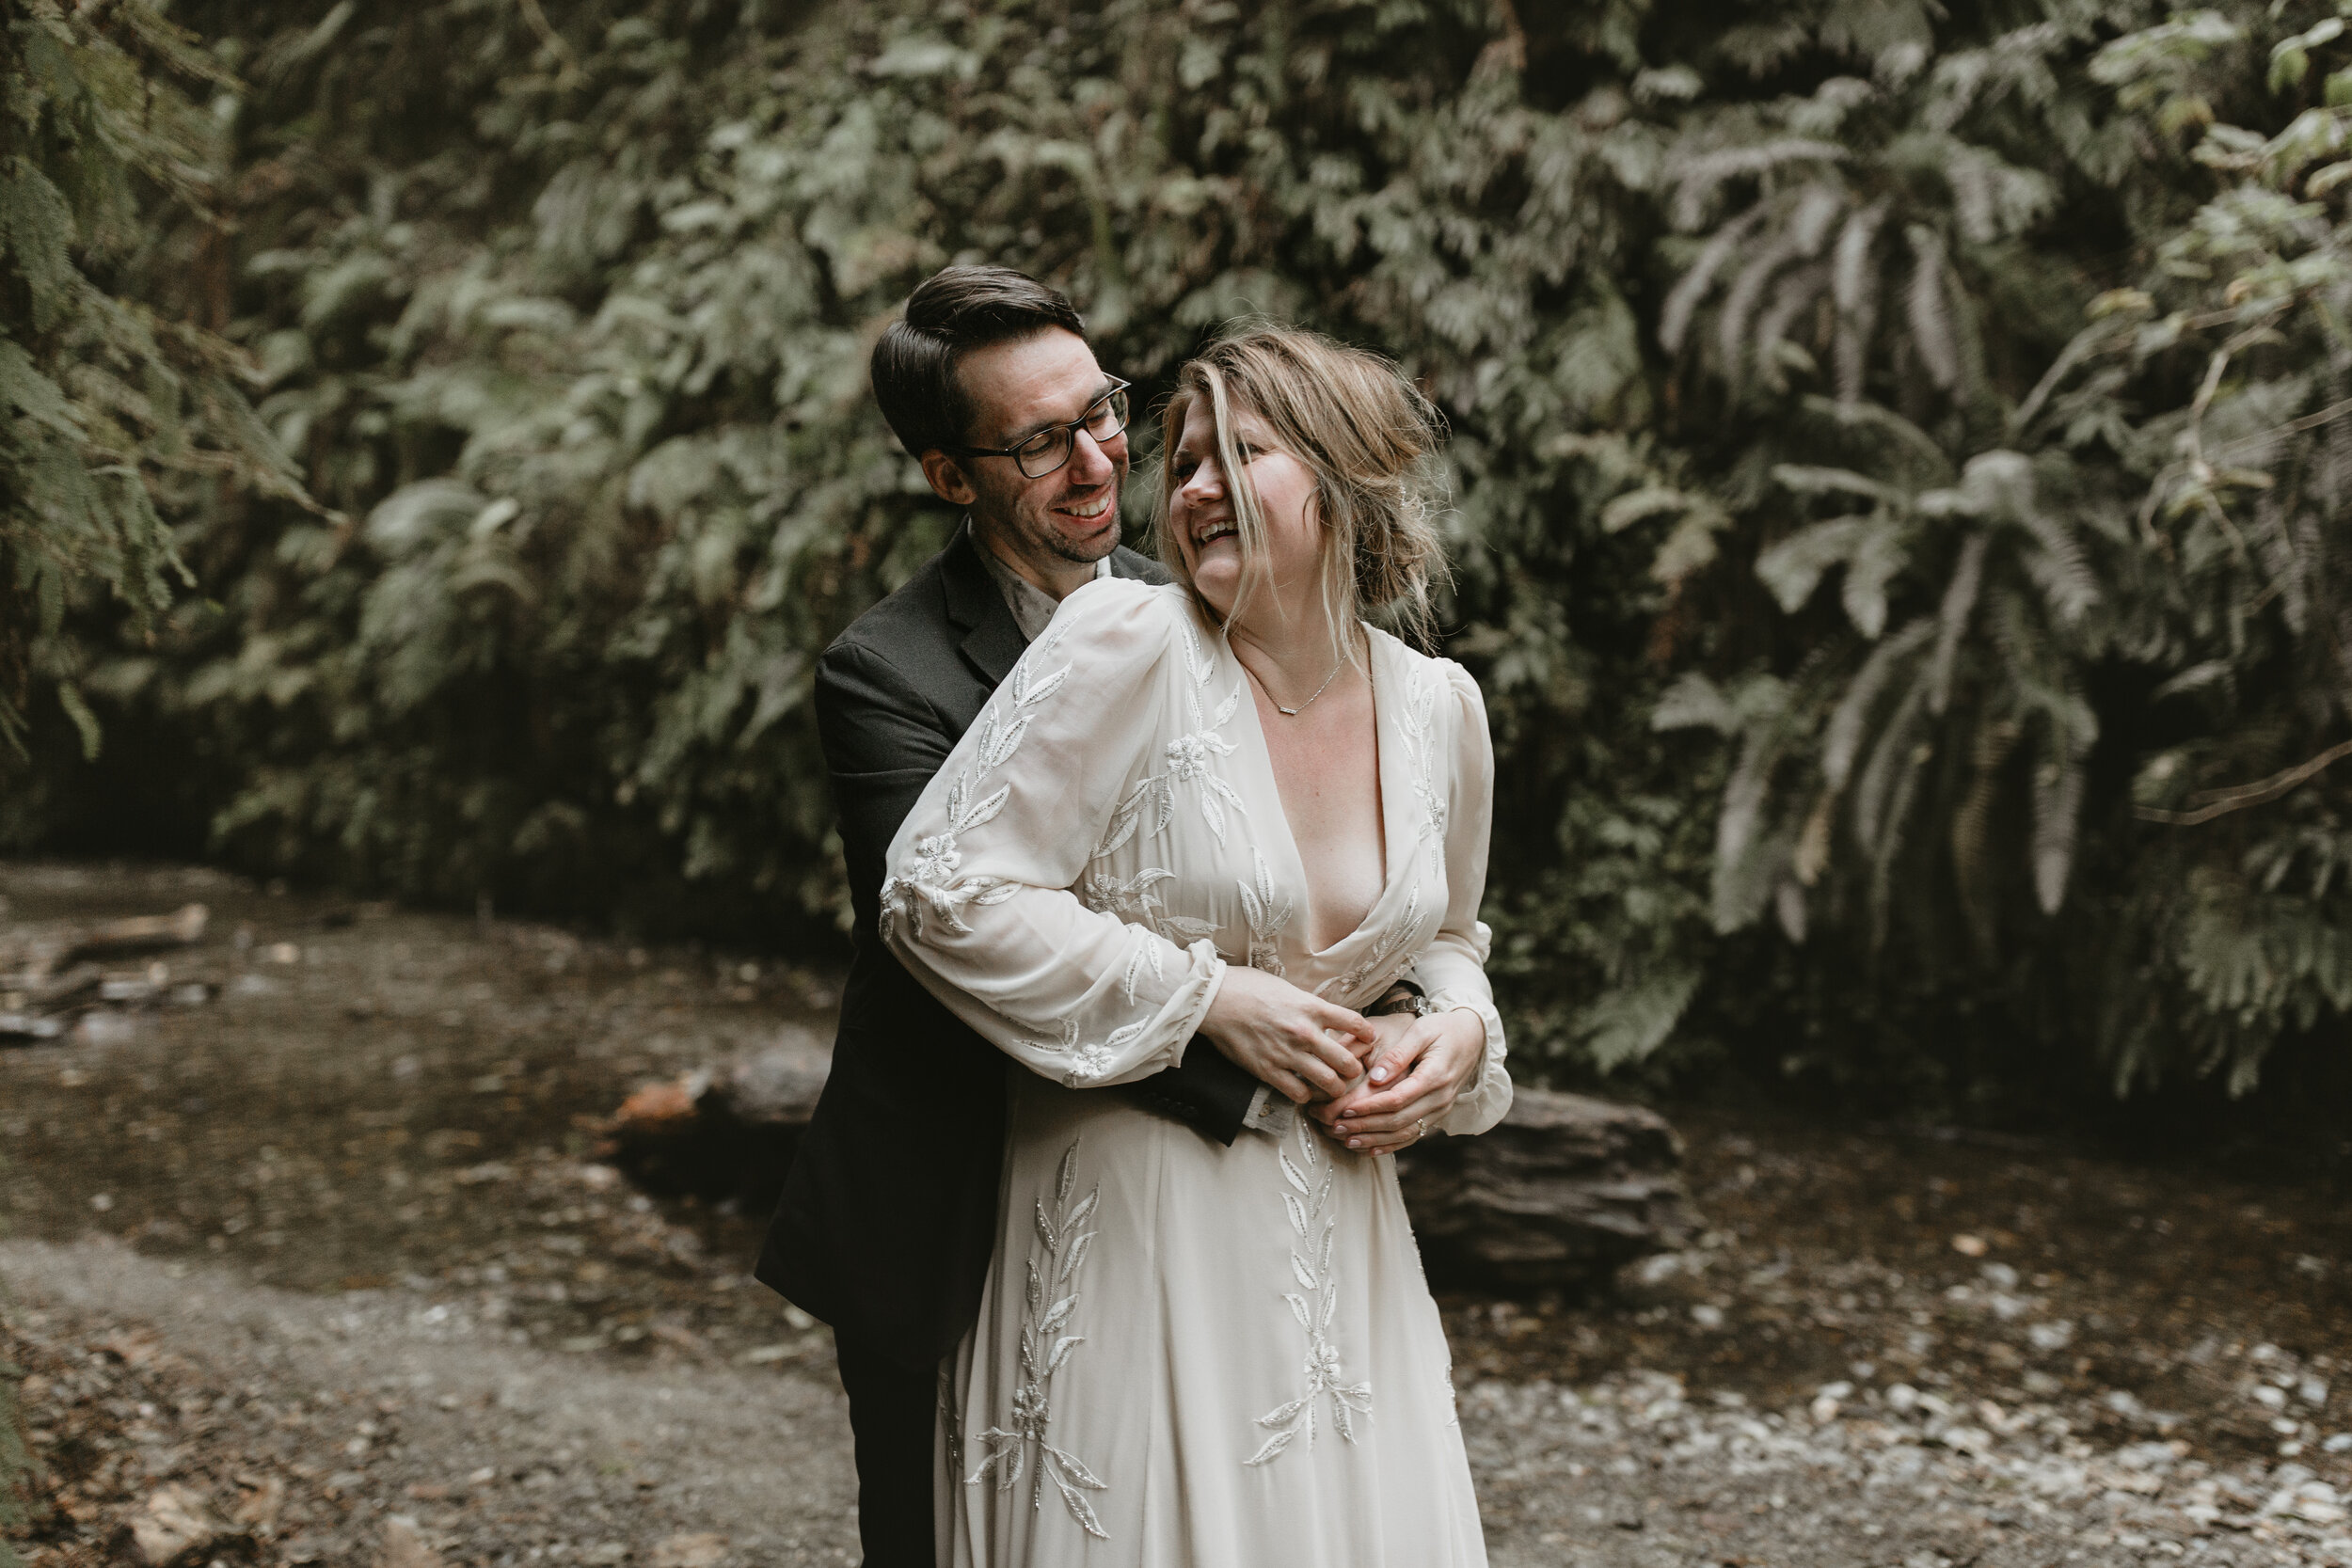 nicole-daacke-photography-redwood-forest-elopement-in-northern-california-patricks-point-coast-adventure-elopement-photography-redwoods-elopement-photographer-179.jpg